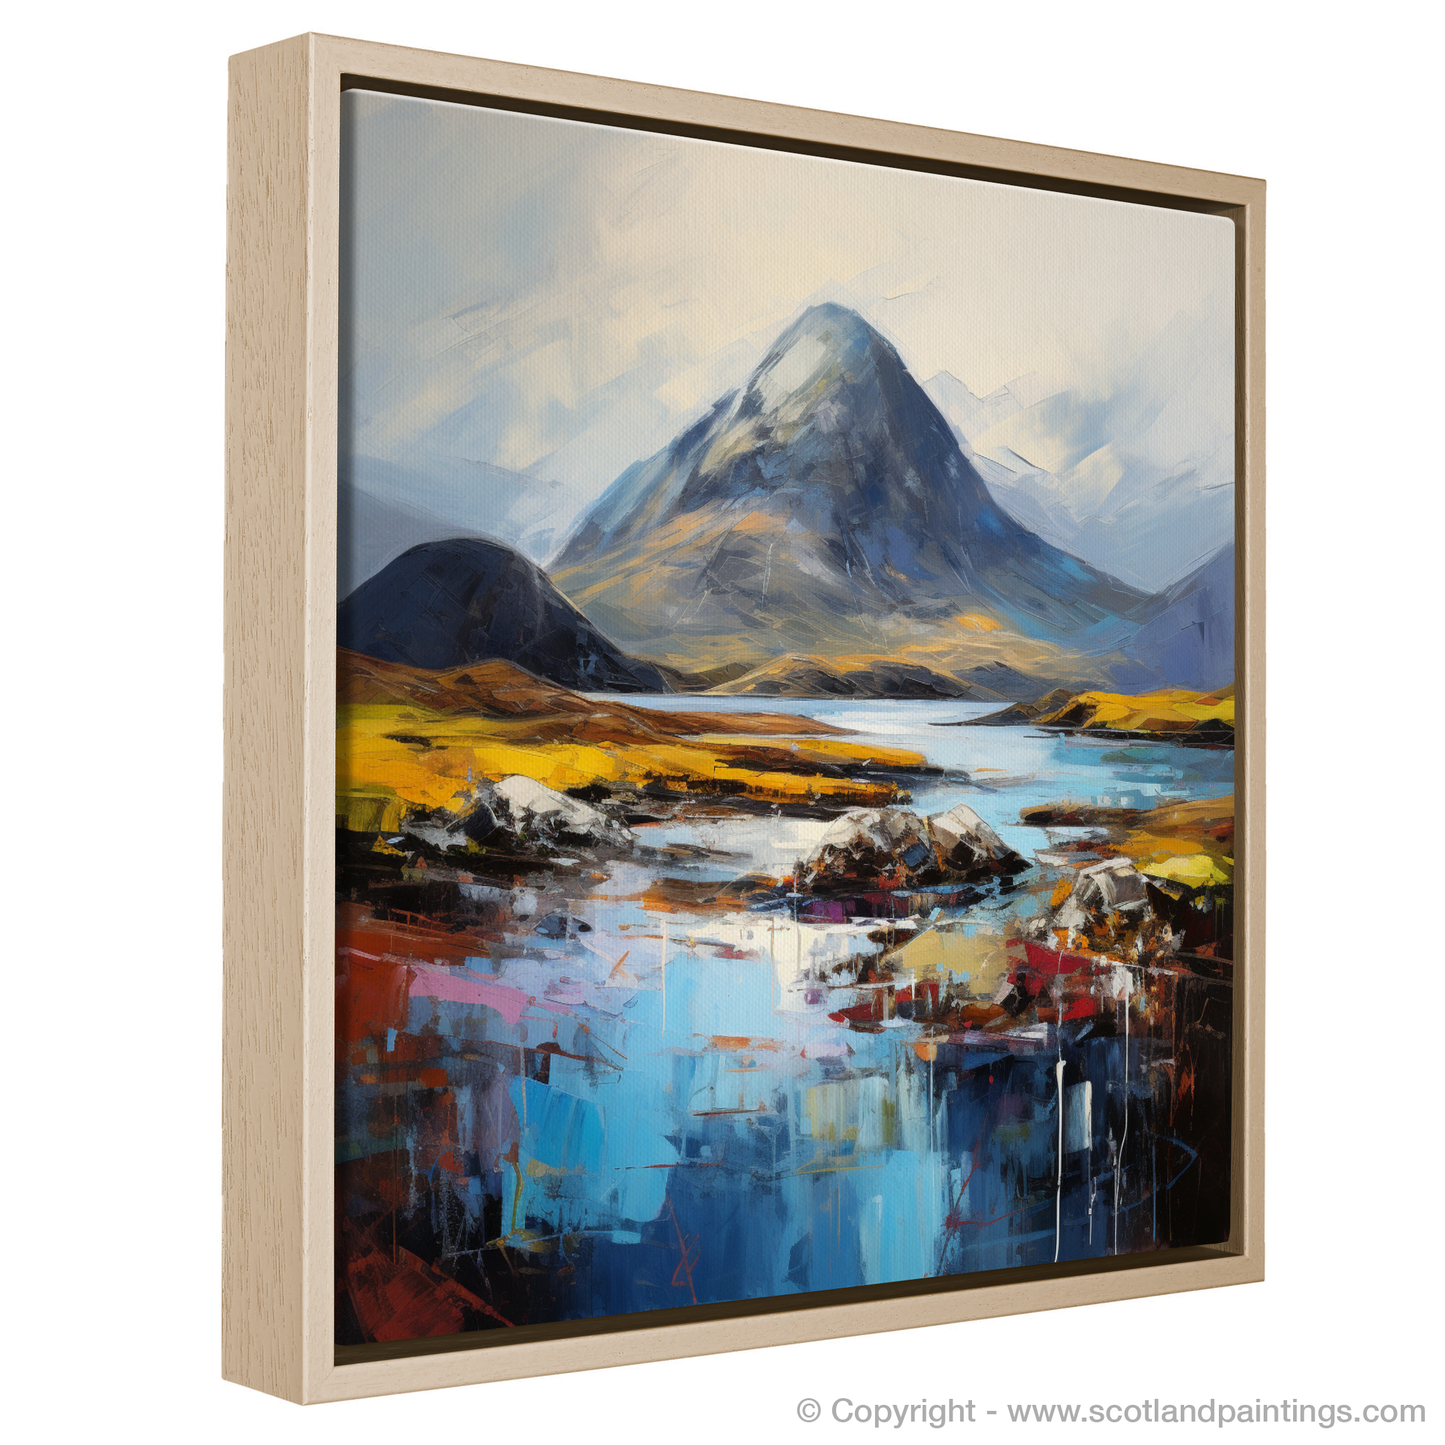 Painting and Art Print of Beinn Alligin, Wester Ross entitled "Majestic Beinn Alligin: An Expressionist Ode to the Scottish Highlands".